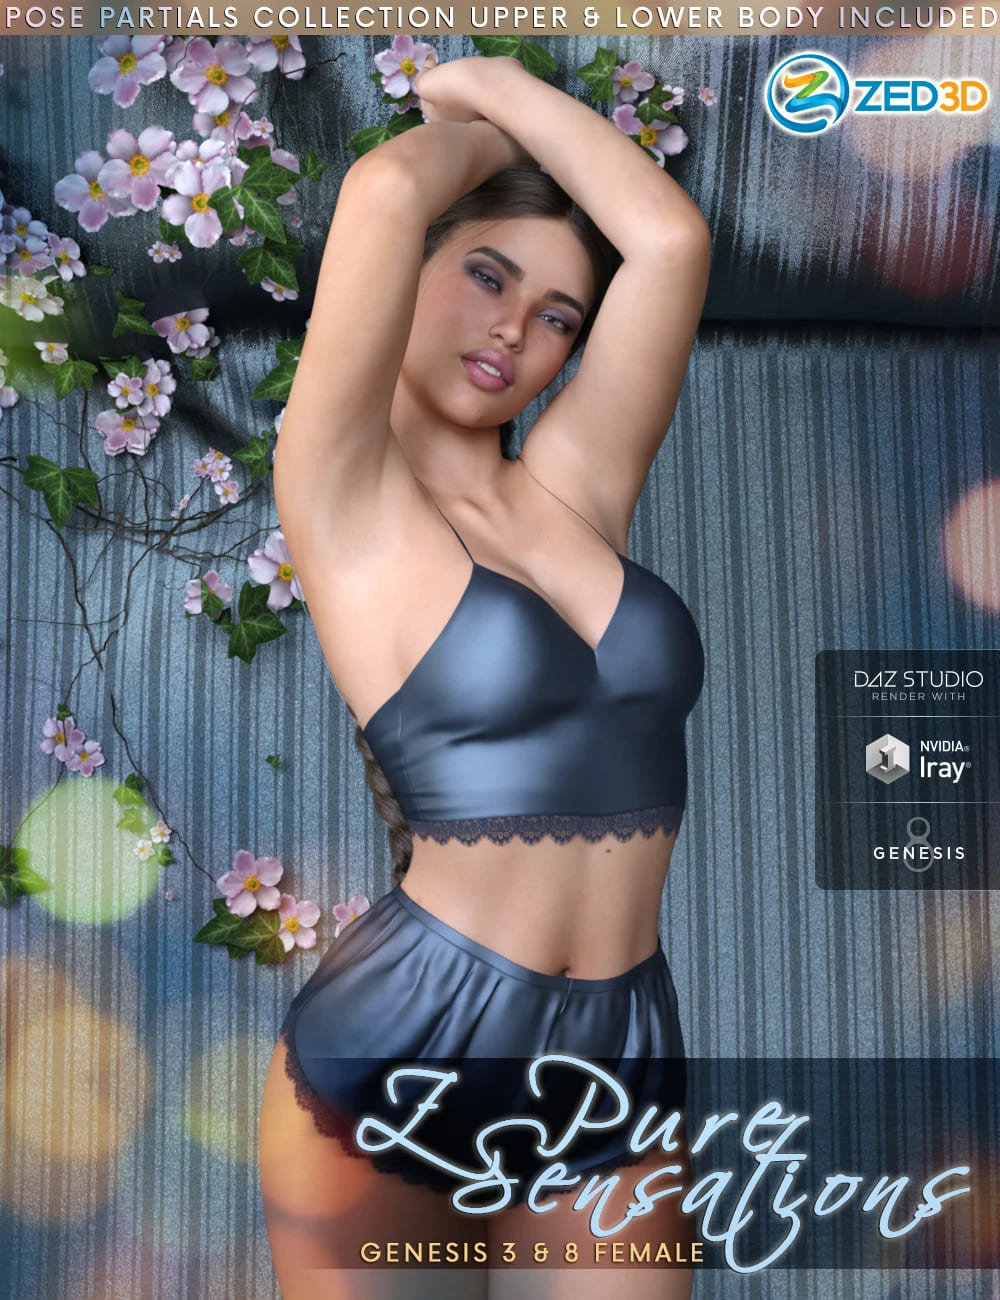 Z Pure Sensations – Poses and Partials for Genesis 3 and 8 Female_DAZ3DDL